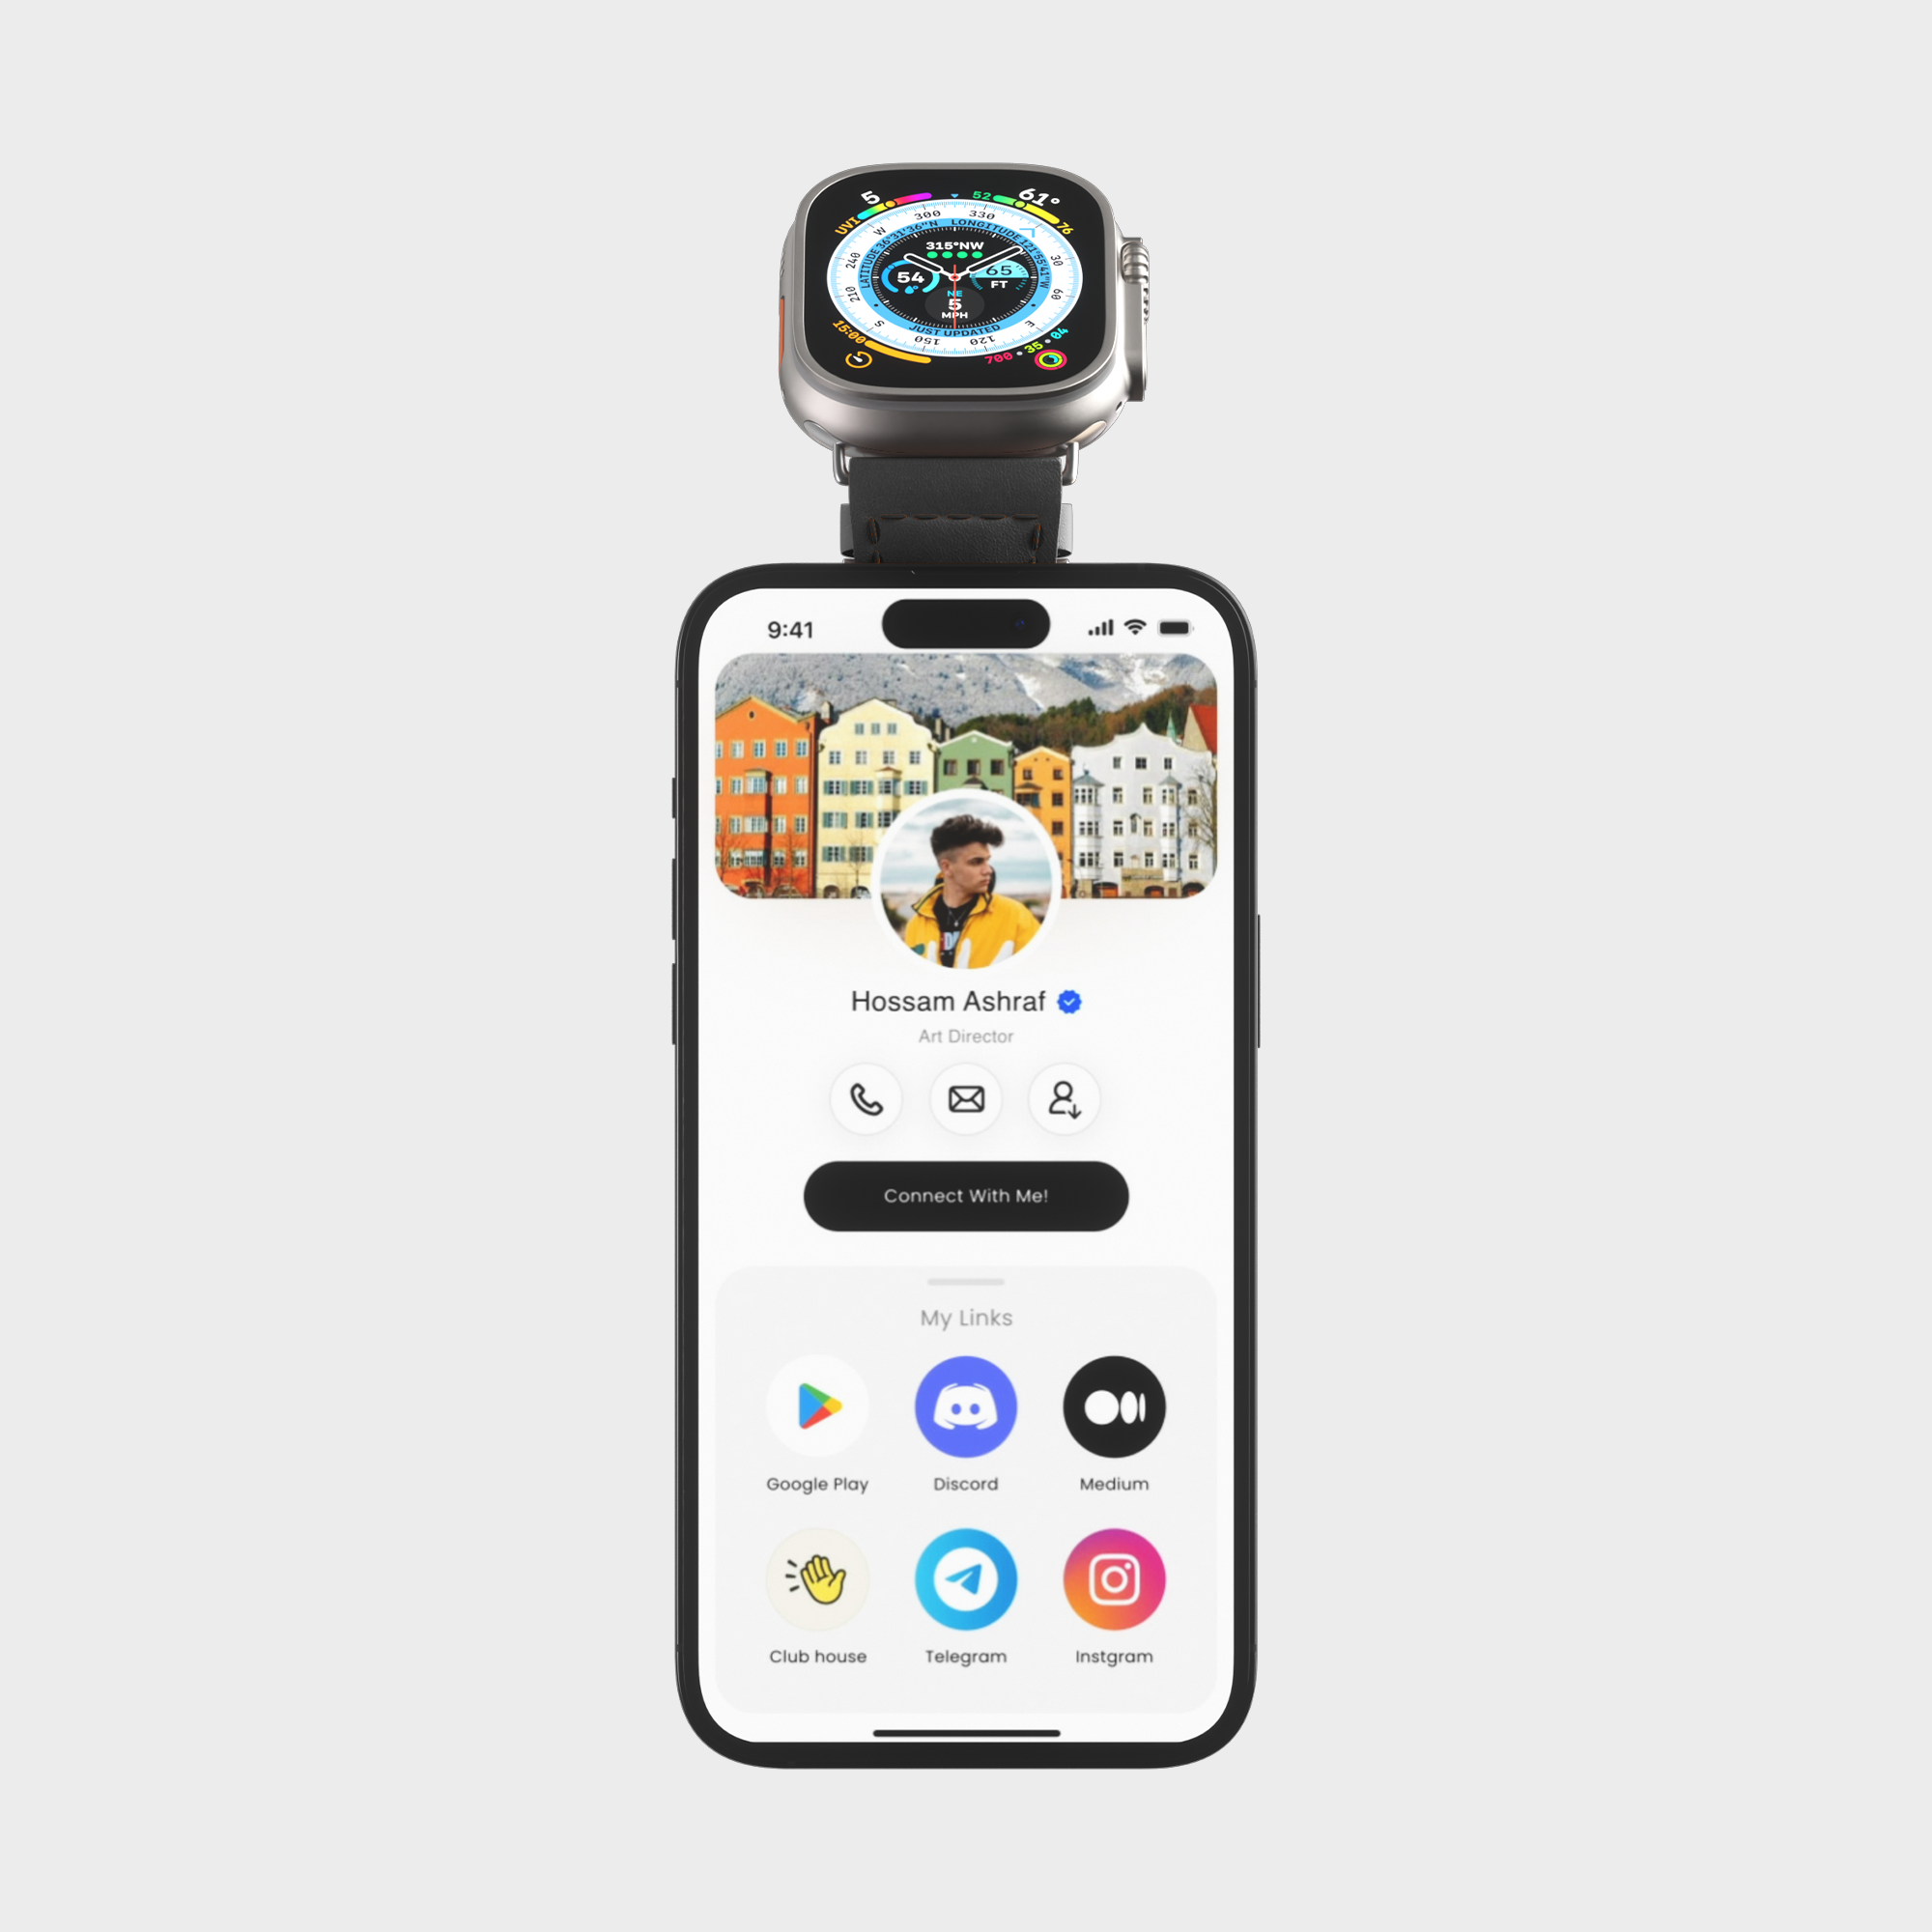 Smartwatch on top of a smartphone displaying a personal profile and social media links.